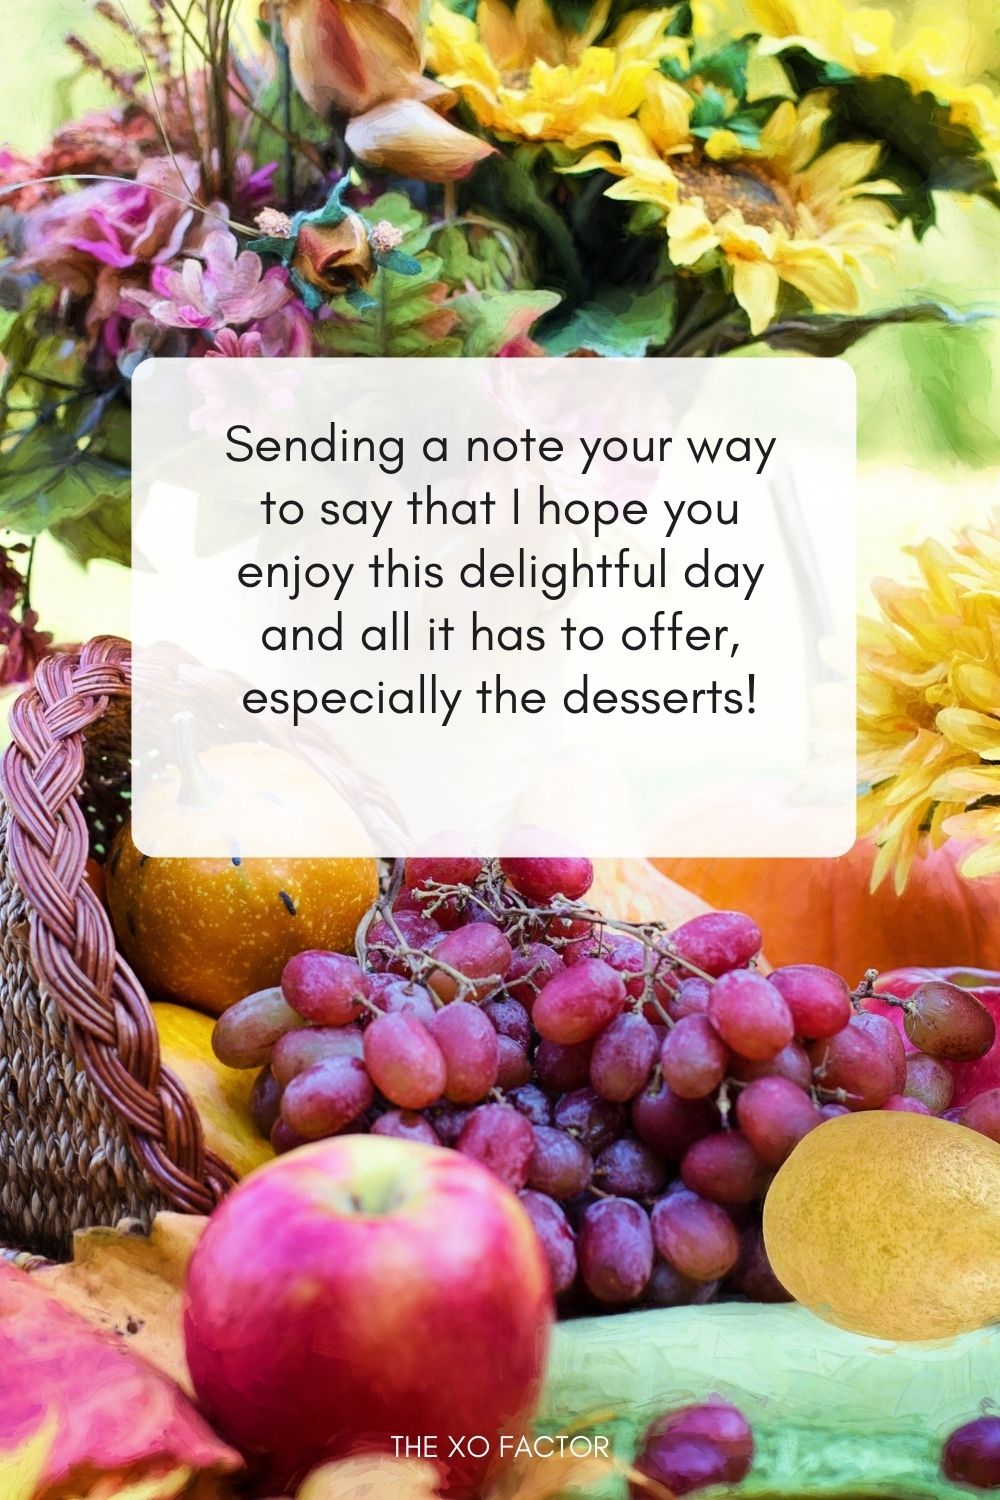 Happy Thanksgiving! Sending a note your way to say that I hope you enjoy this delightful day and all it has to offer, especially the desserts!